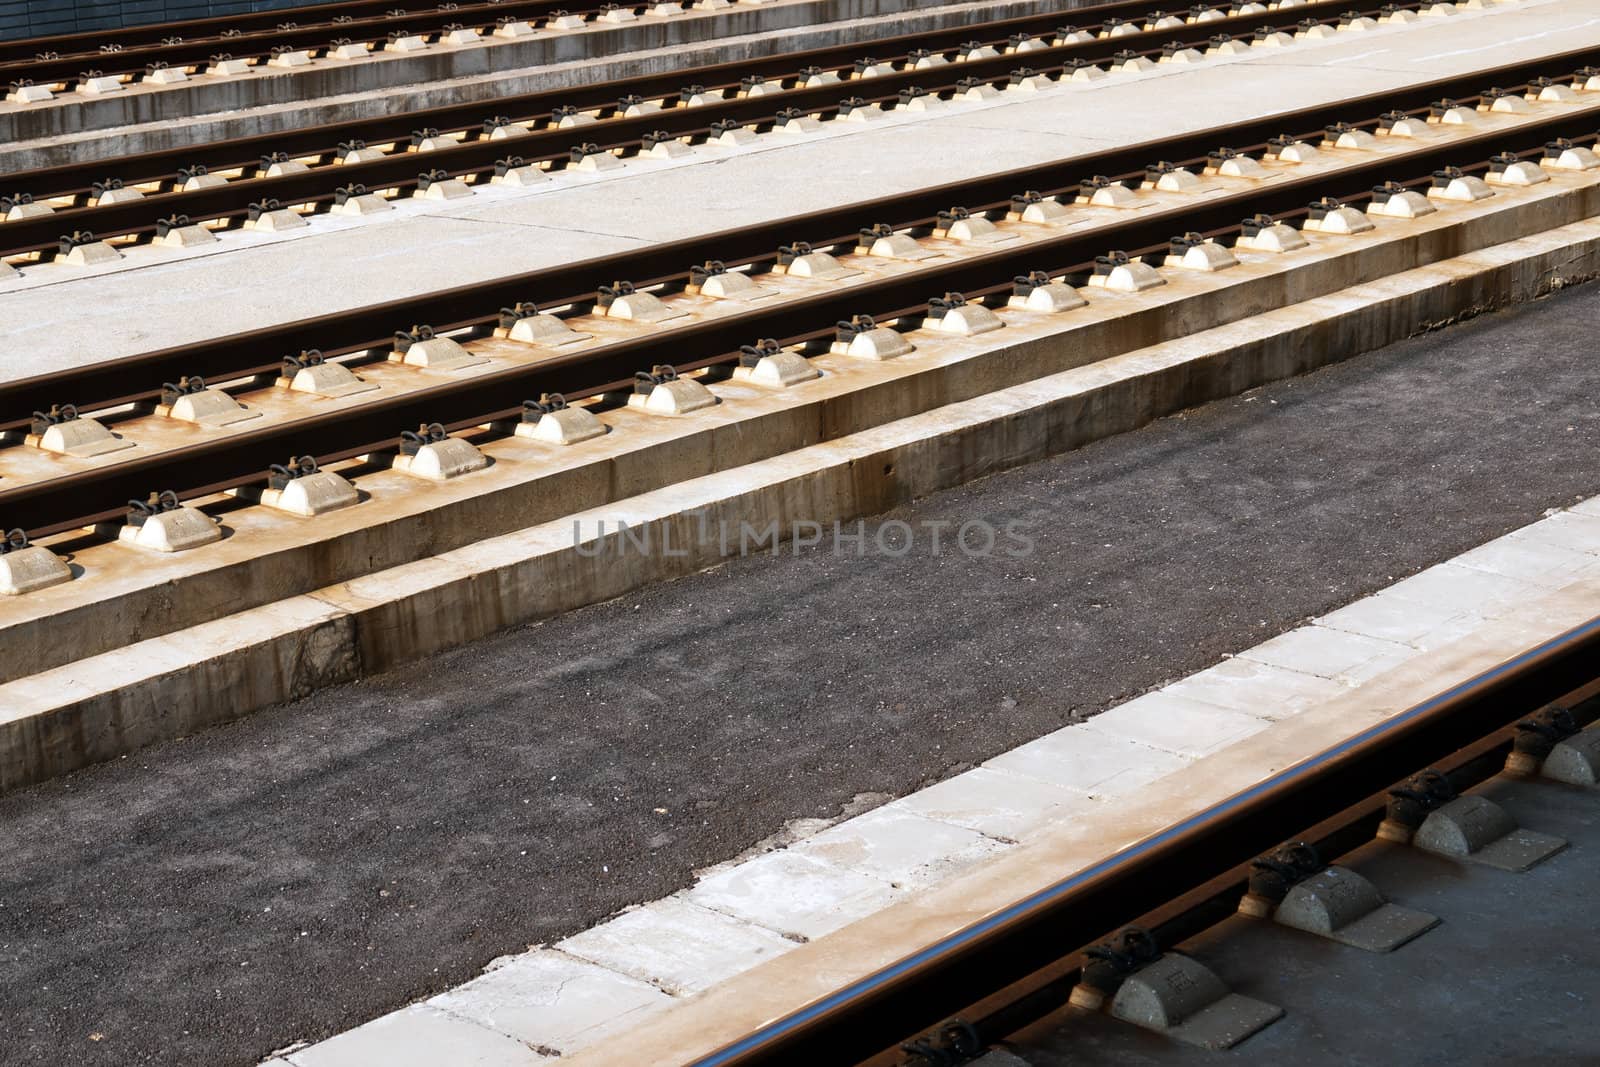 Rail track at the railway station